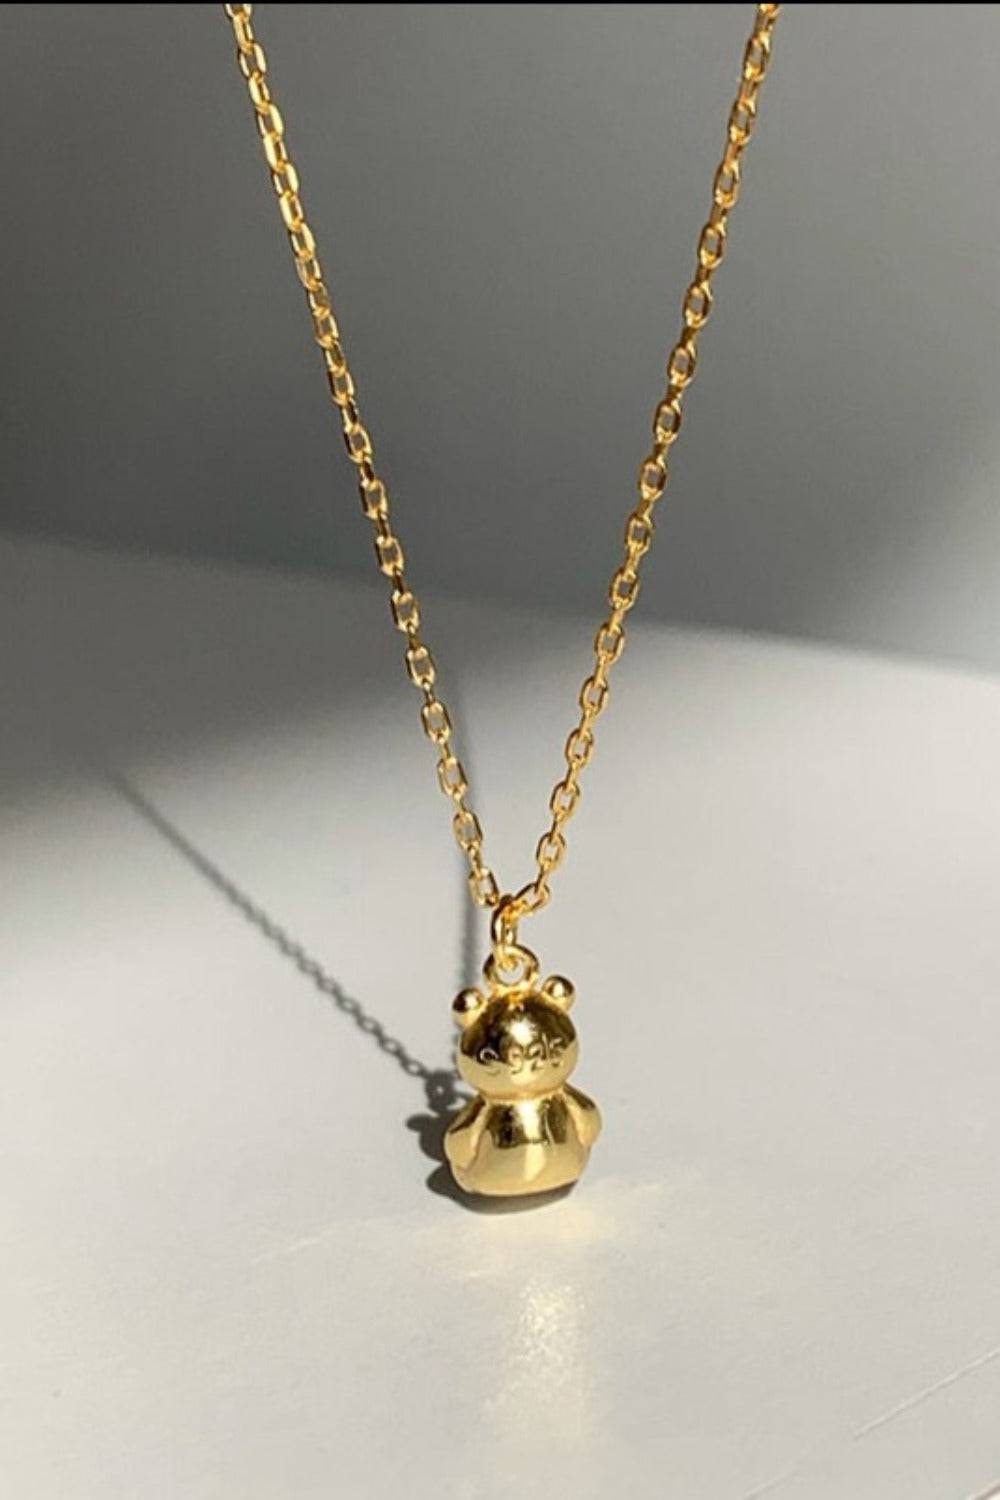 Gold Teddy Bear Charm Necklace - TGC Boutique - Gold Necklace